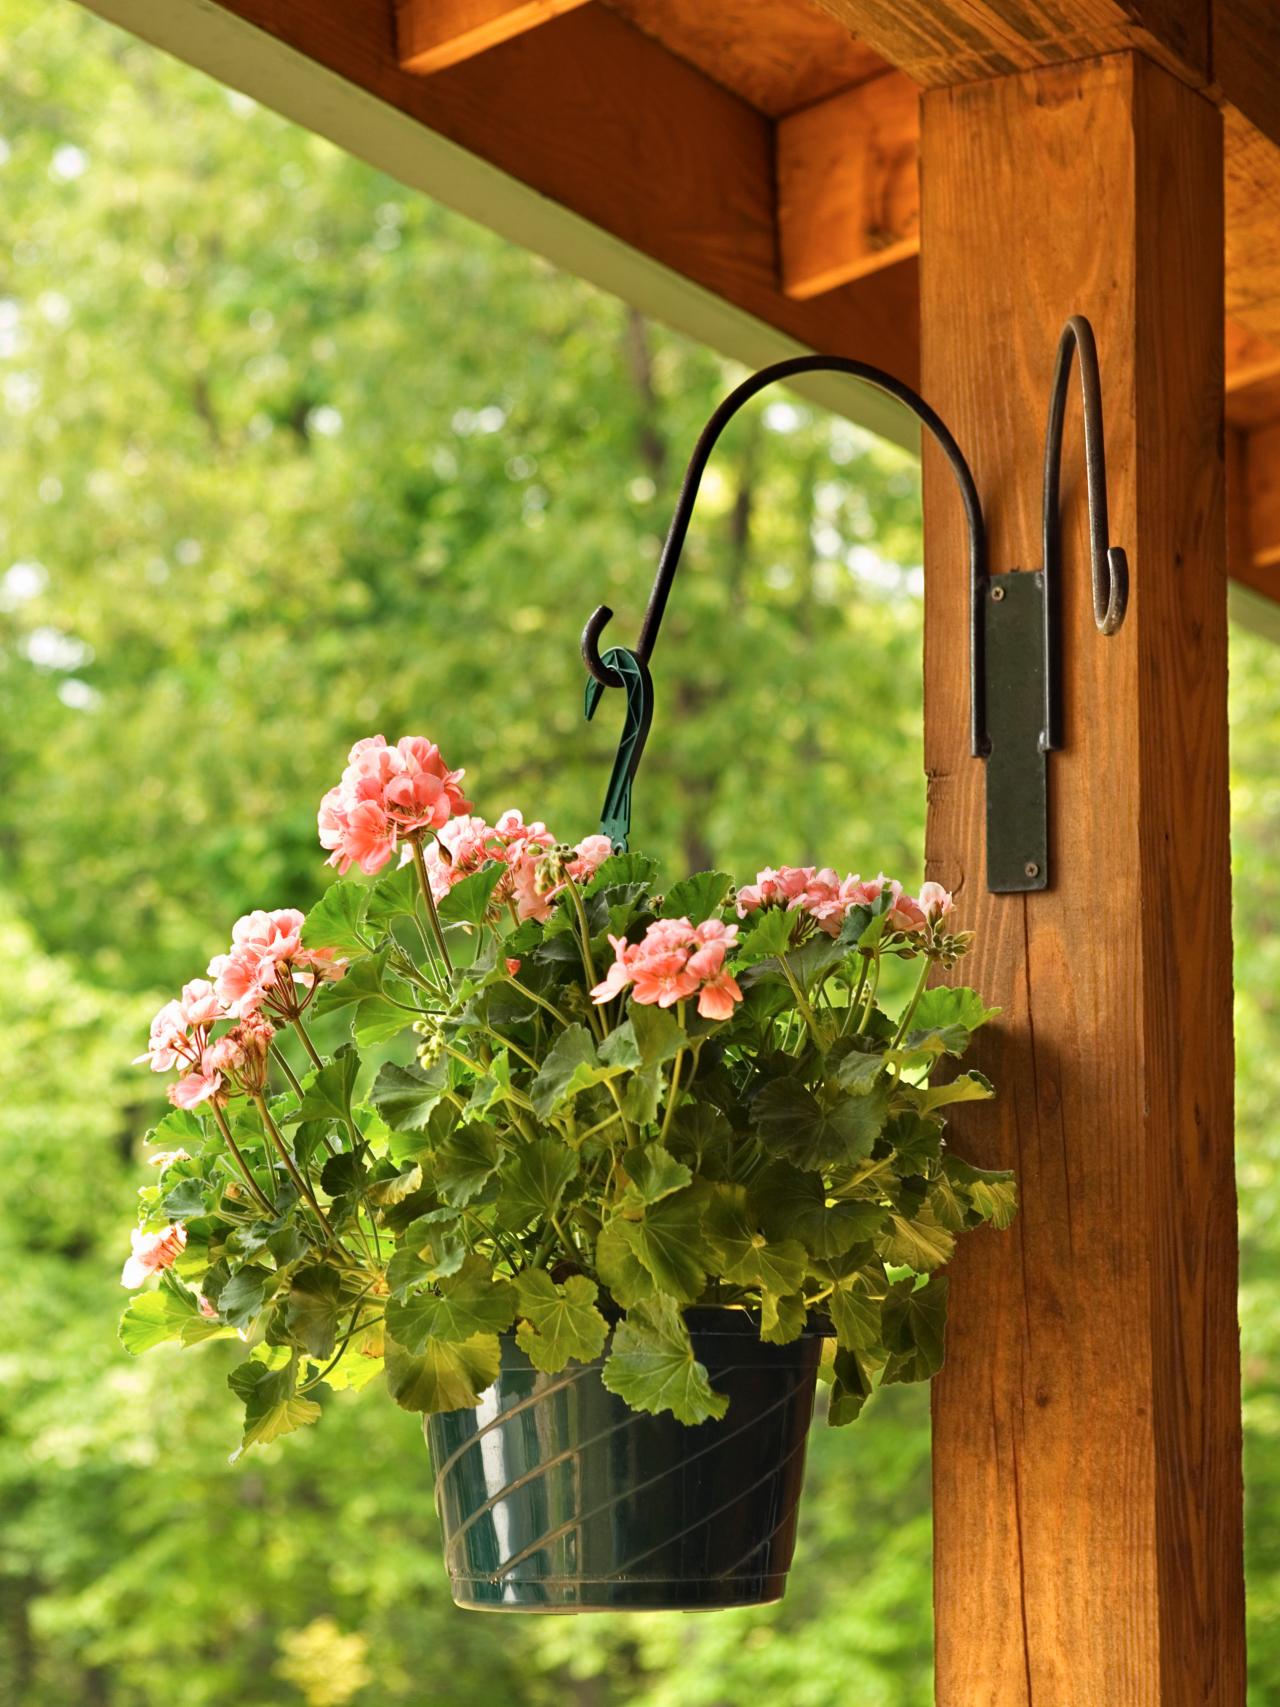 Missie Ideaal Aanpassing How to Support and Water Hanging Baskets | HGTV